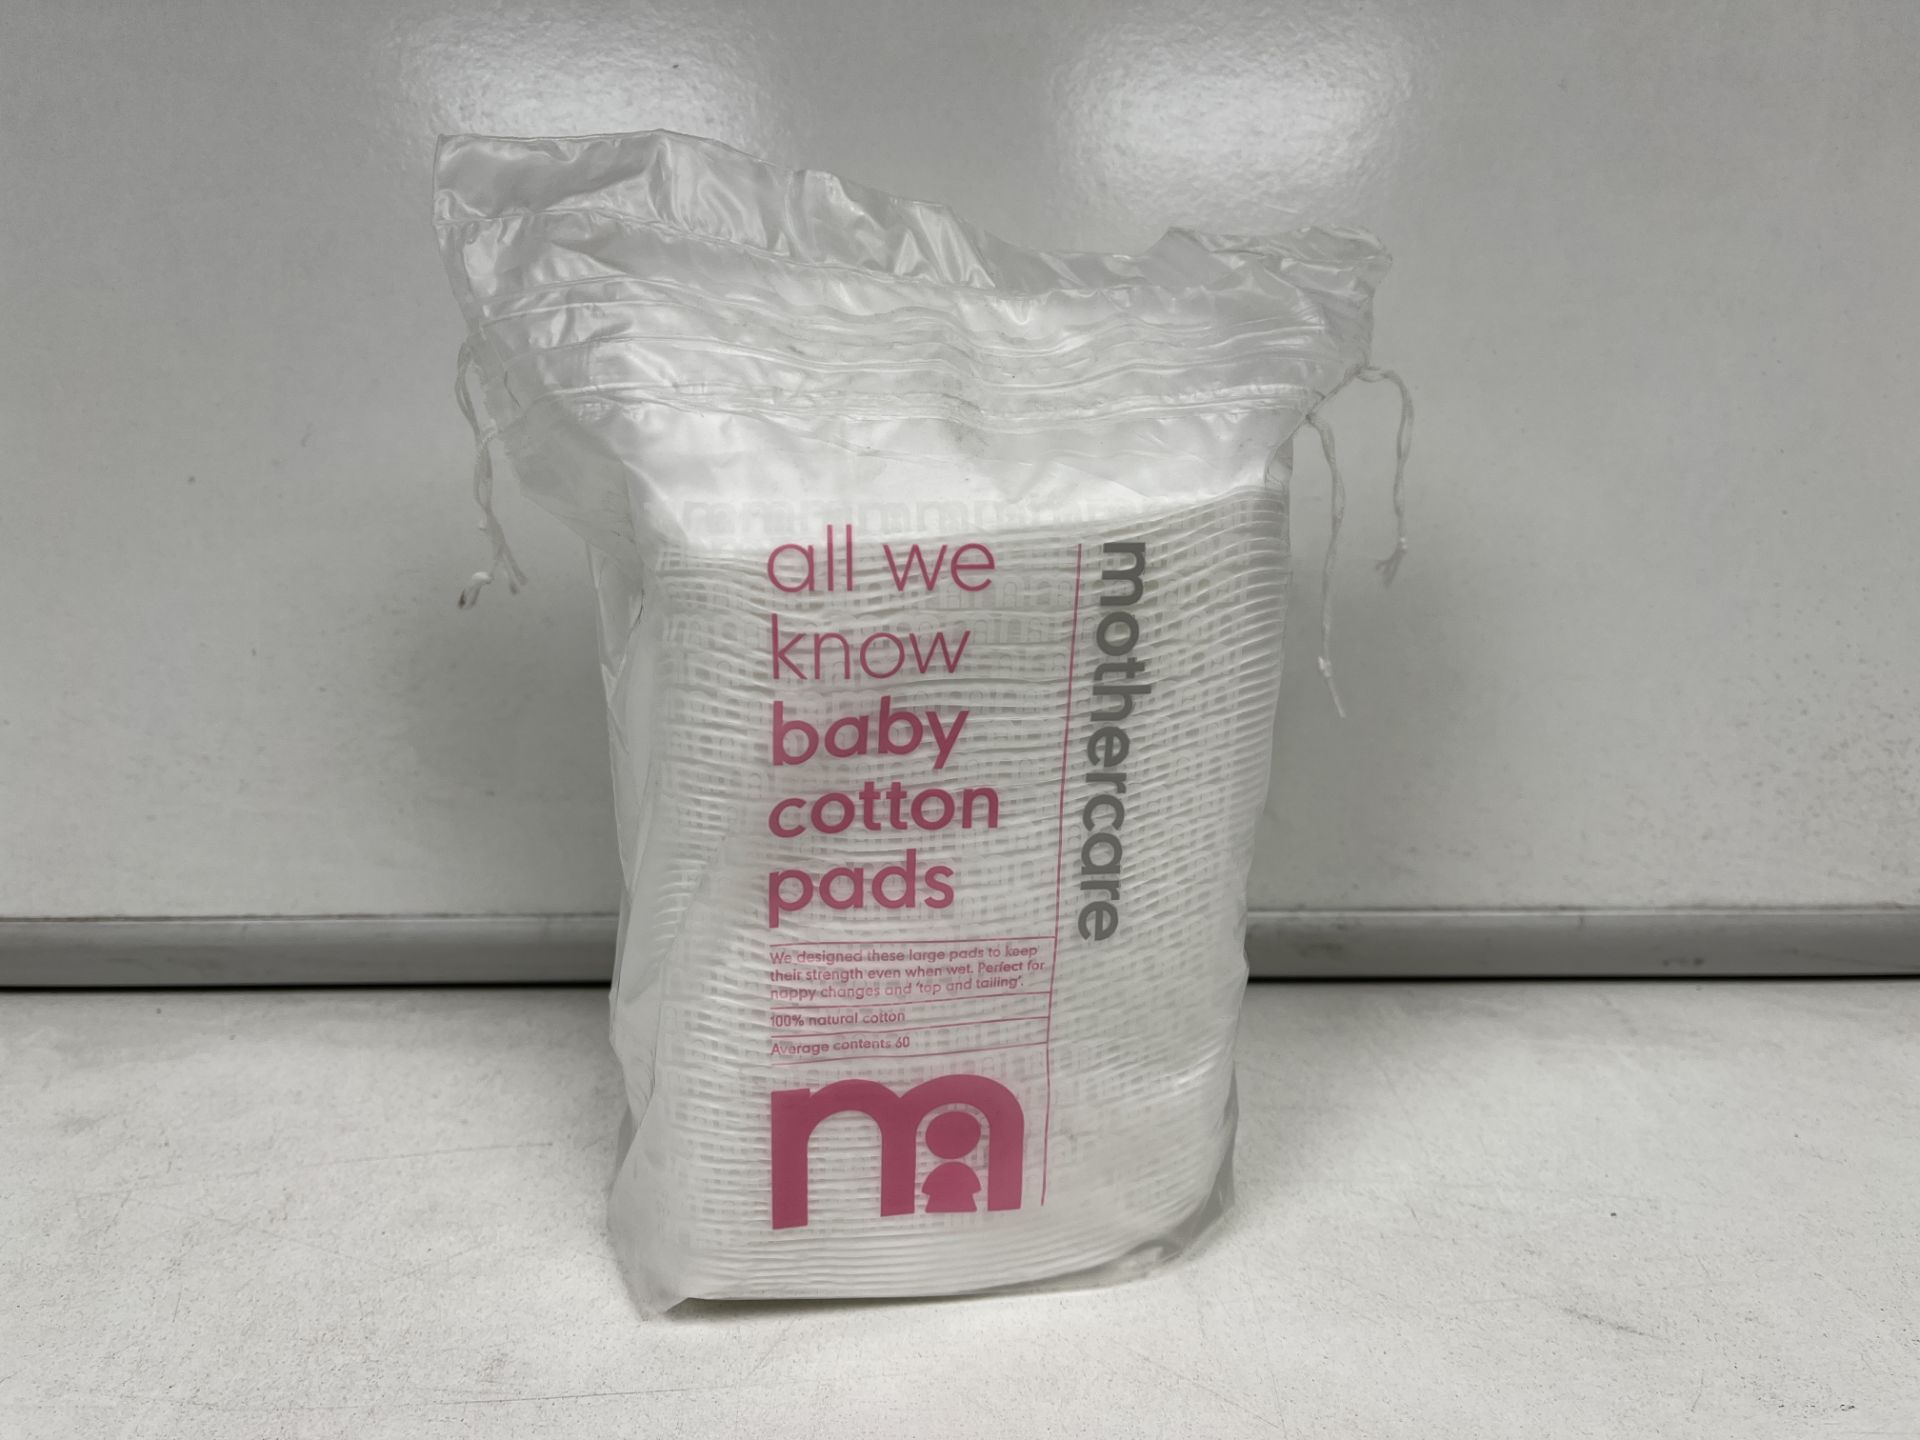 180 X BRAND NEW PACKS OF MOTHERCARE ALL WE KNOW BABY COTTON PADS R2